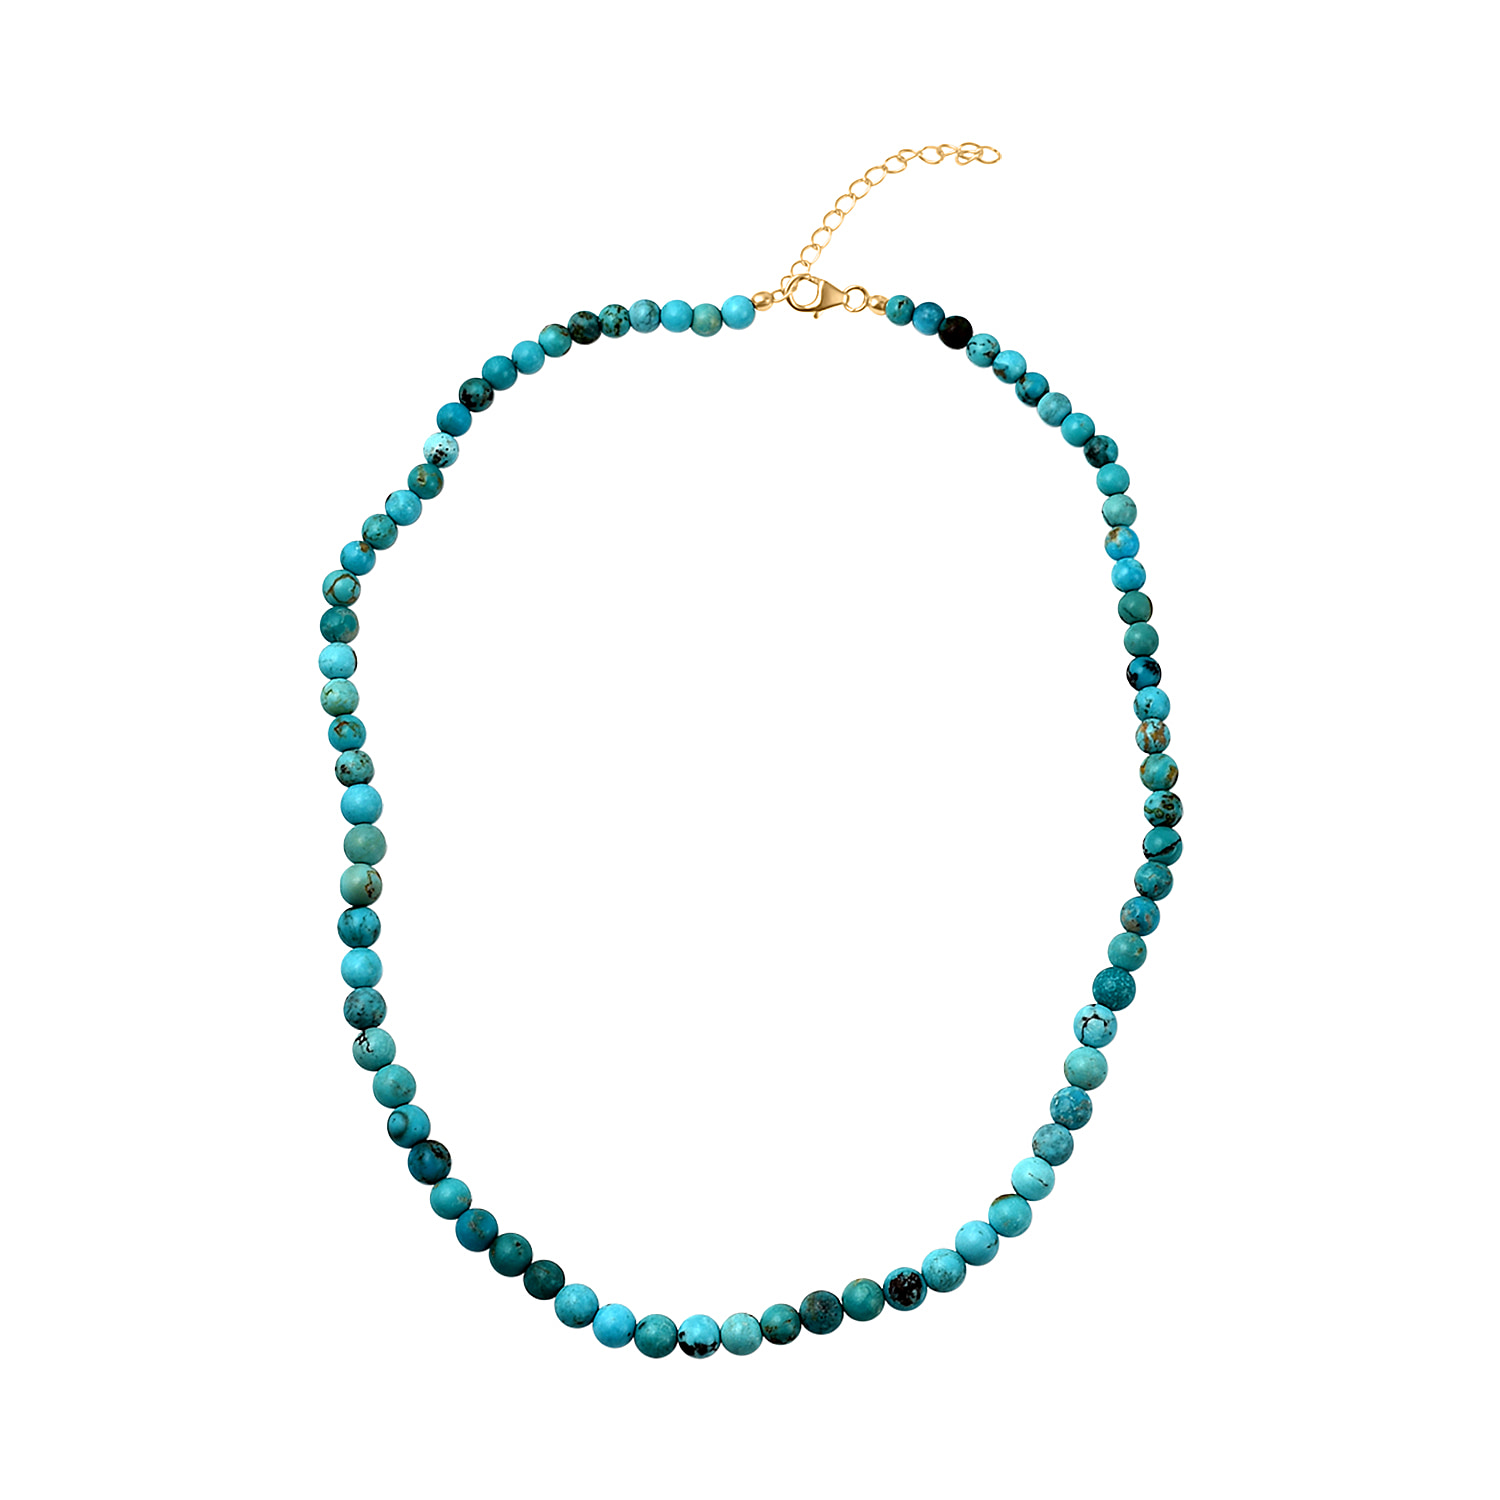 Tucson Special - Natural Arizona Turquoise Necklace (Size 18-20) in 18K Gold Vermeil Plated Sterling Silver 88.62 Ct